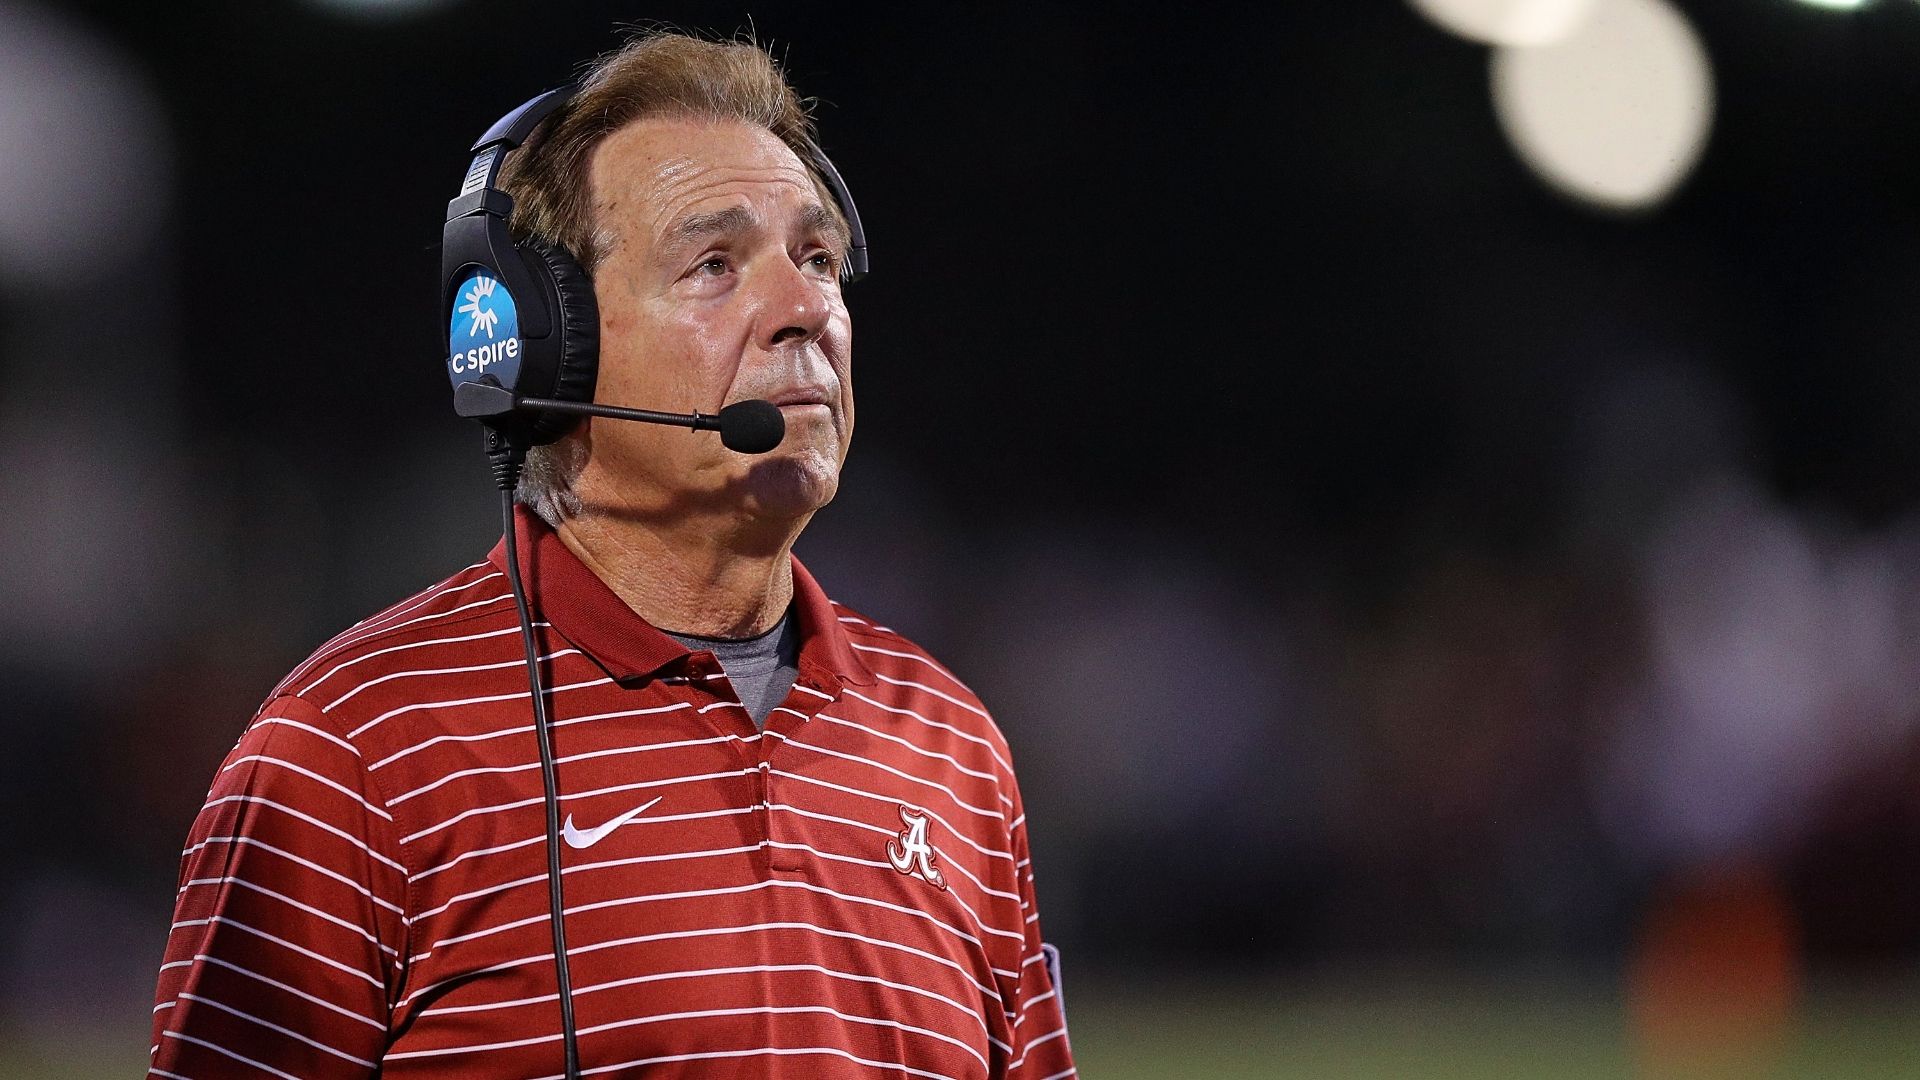 Saban's main emphasis is timing, eliminating mistakes